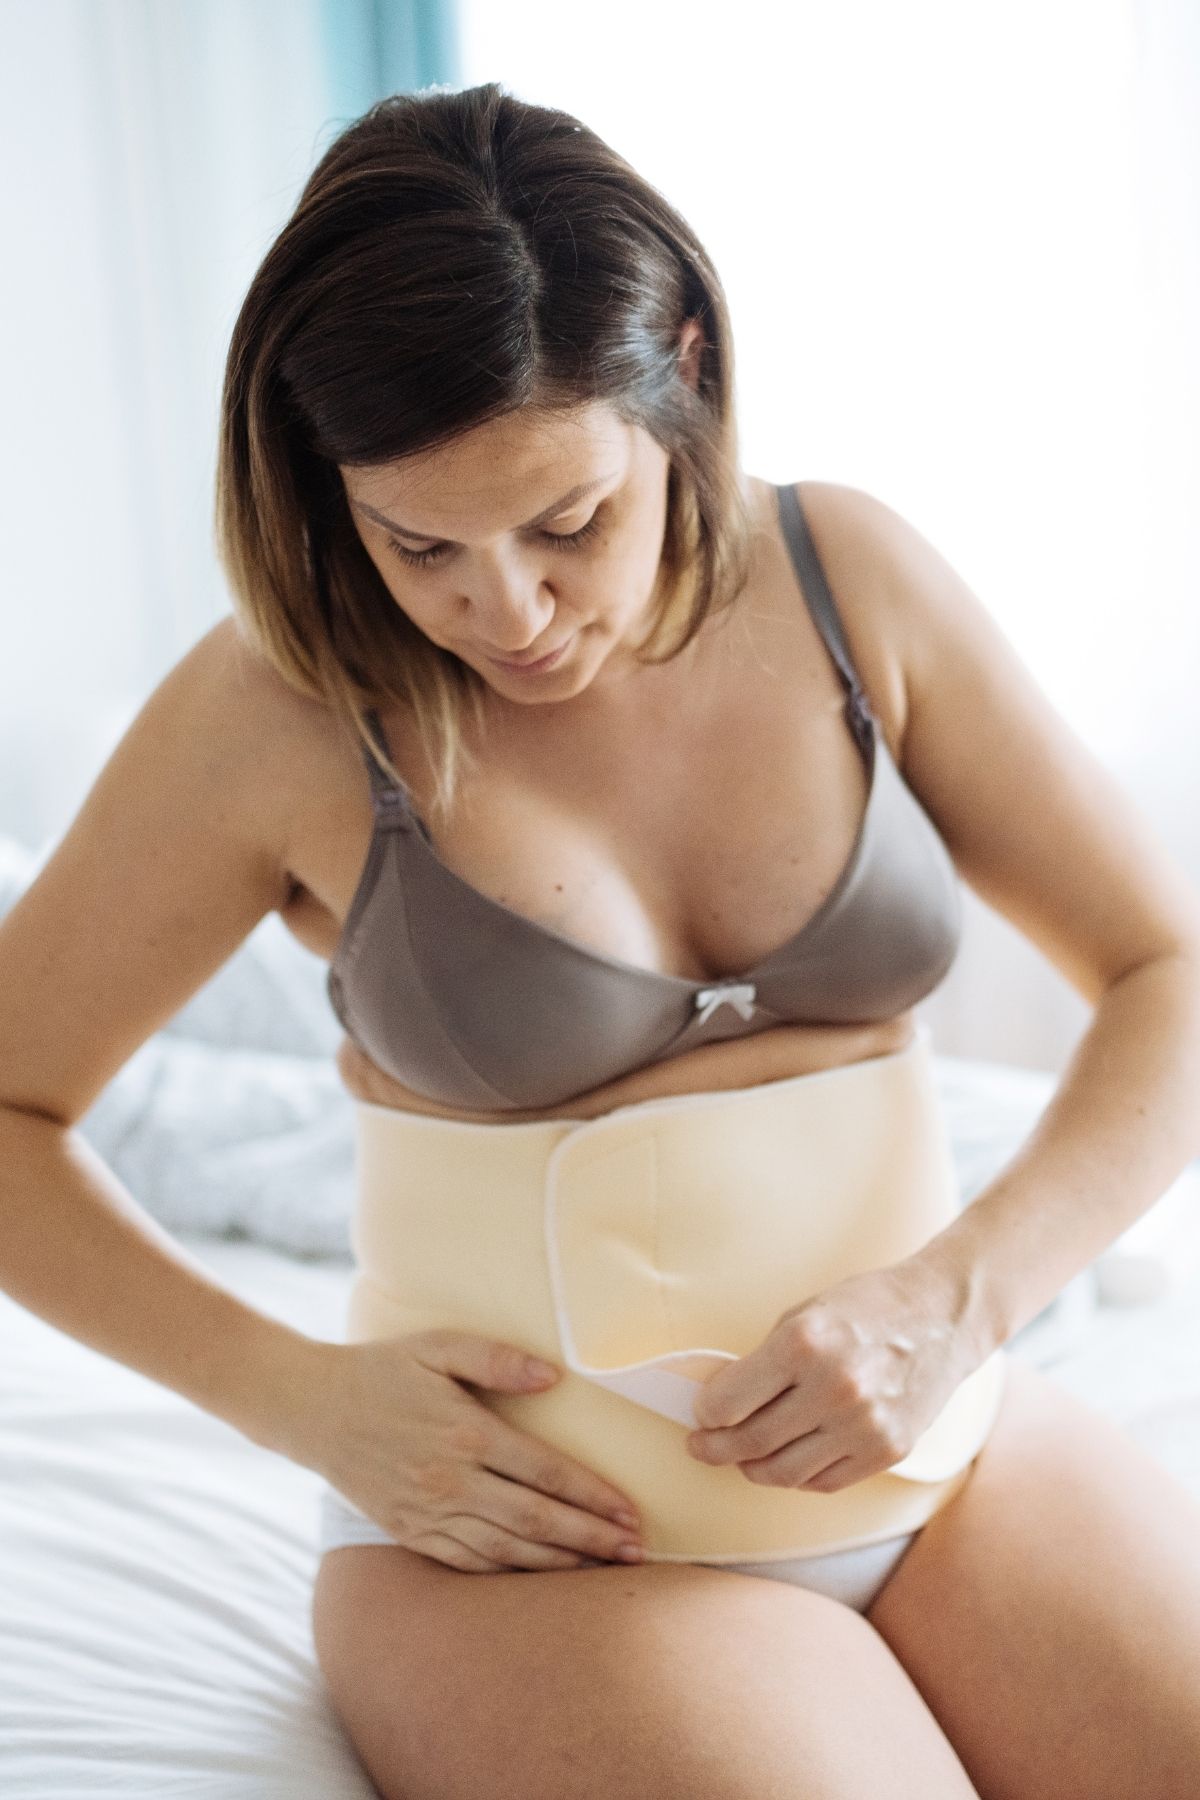 New mom sits on her bed while putting on a postpartum girdle.